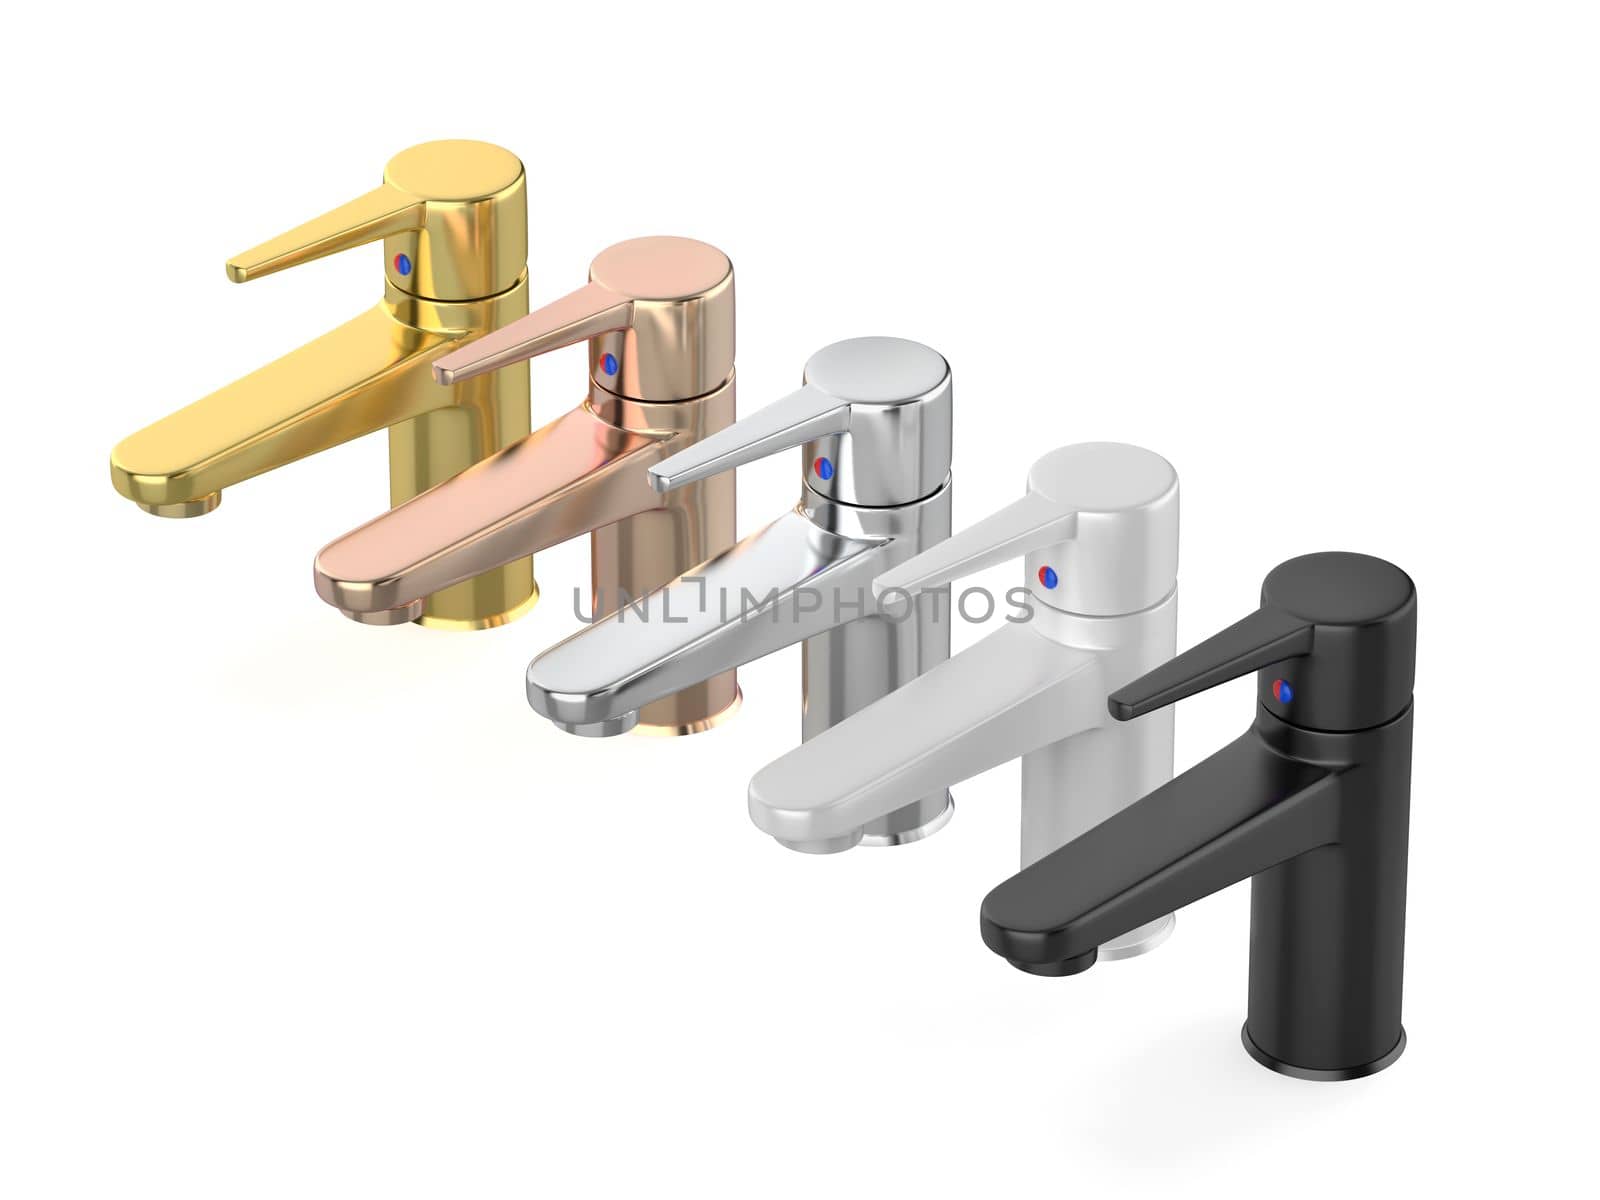 Bathroom faucets with different colors and materials by magraphics